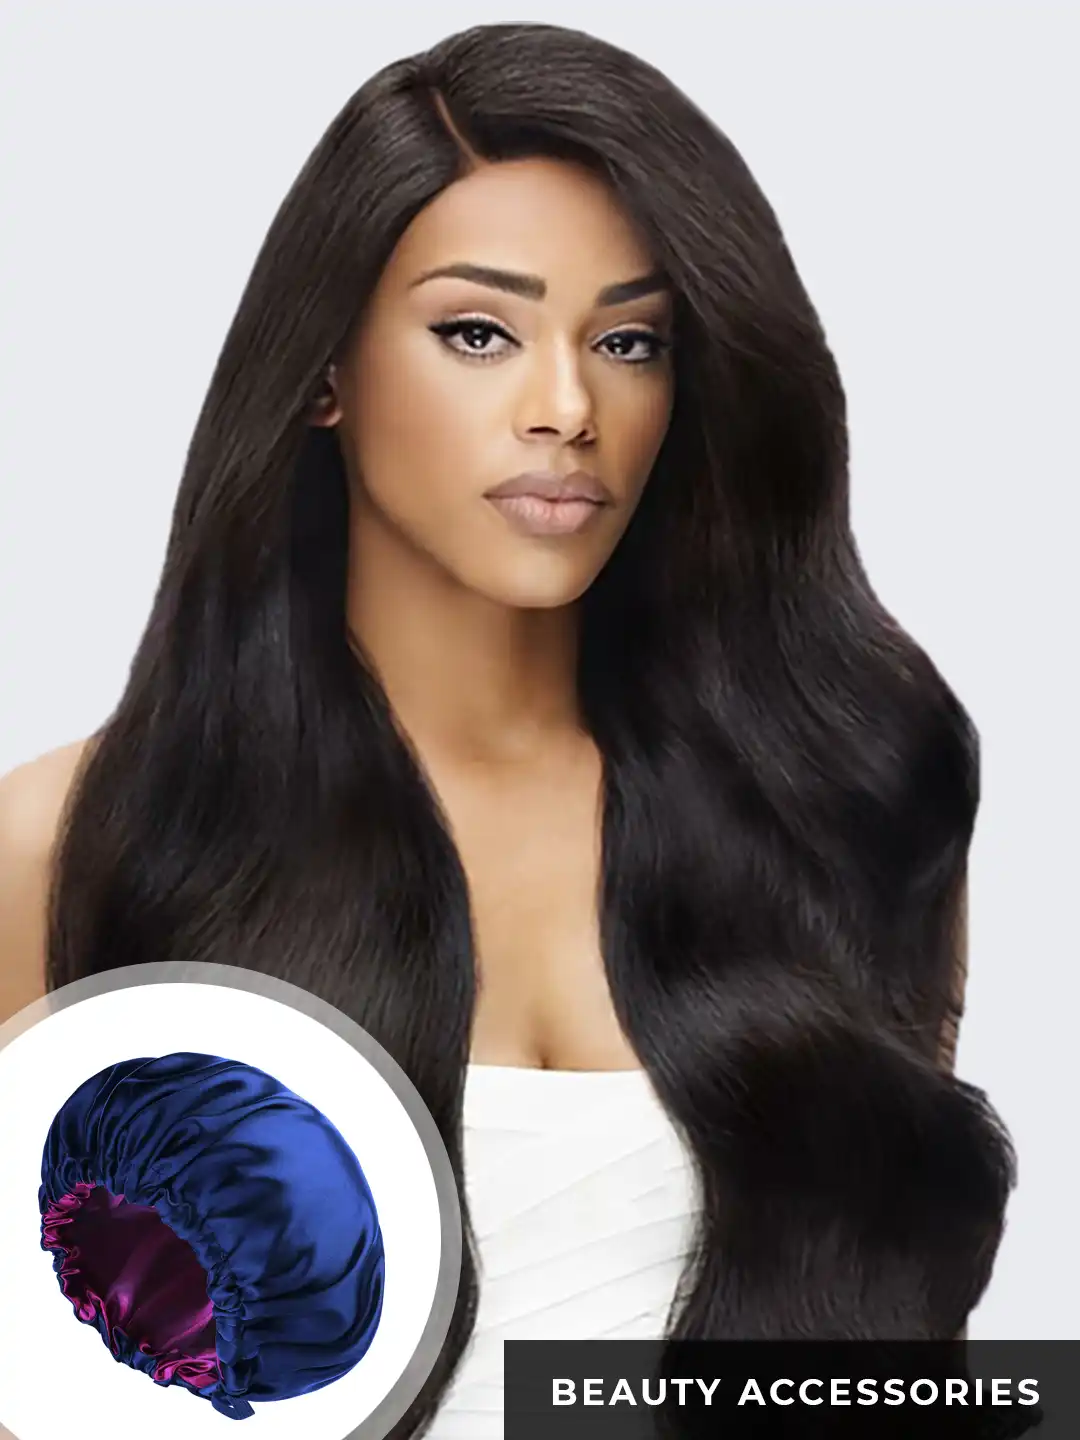 Wig Accessories For Black Women